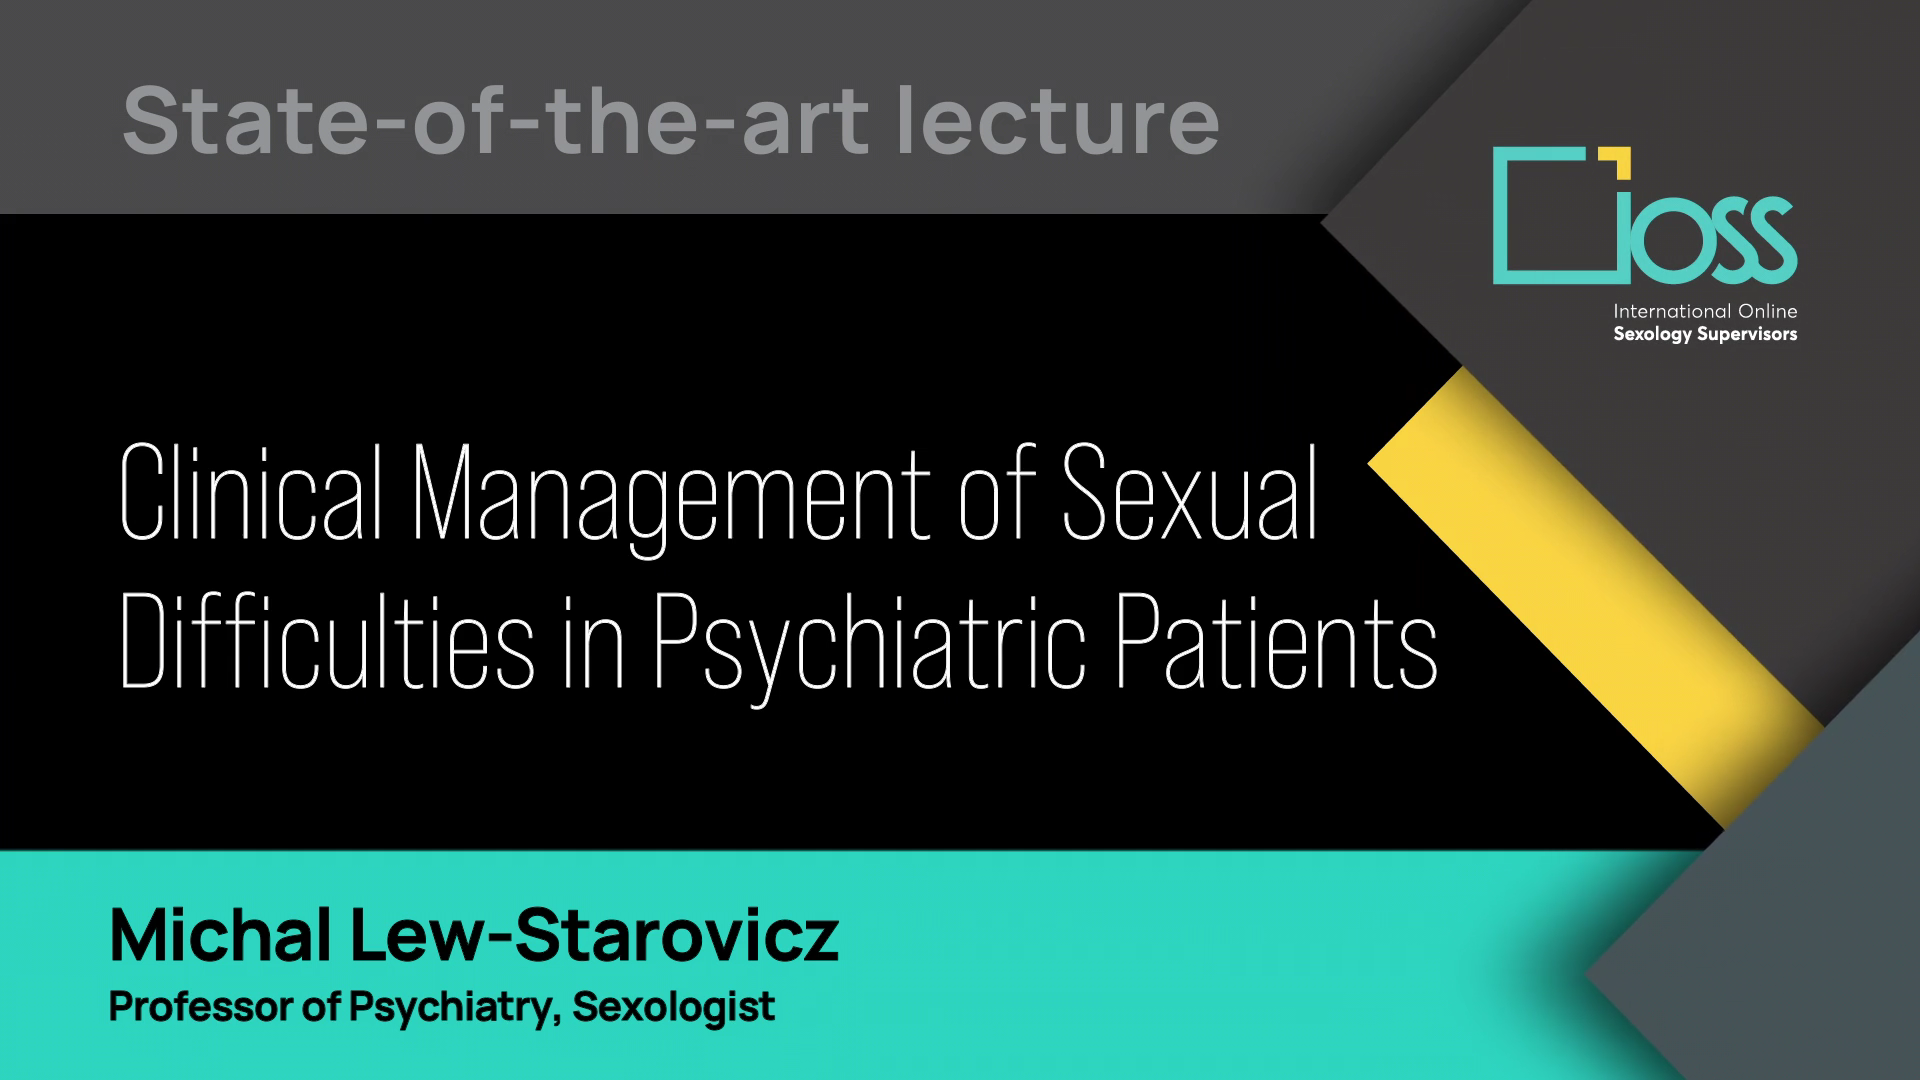 Clinical Management of Sexual Difficulties in Psychiatric Patients